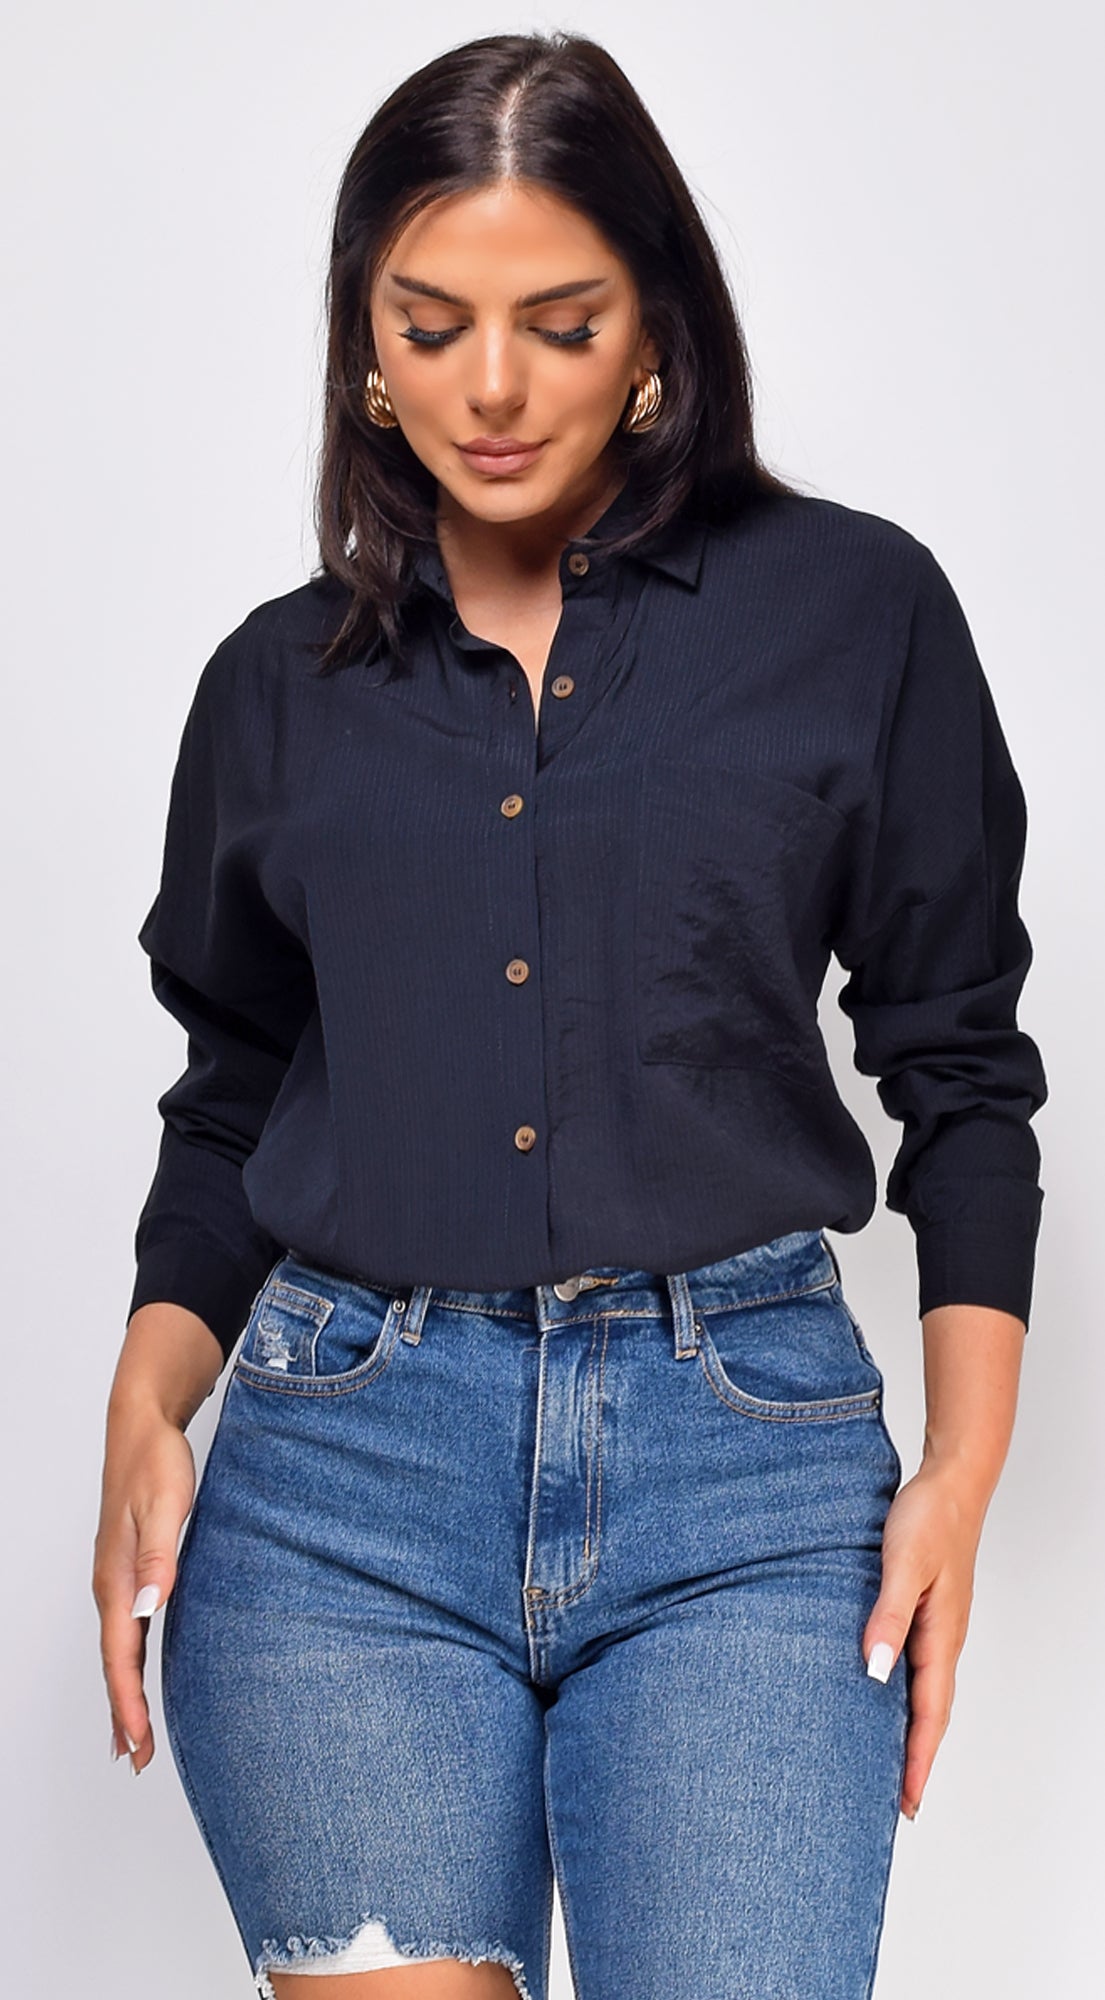 Jenny Black Collared Button Down Shirt